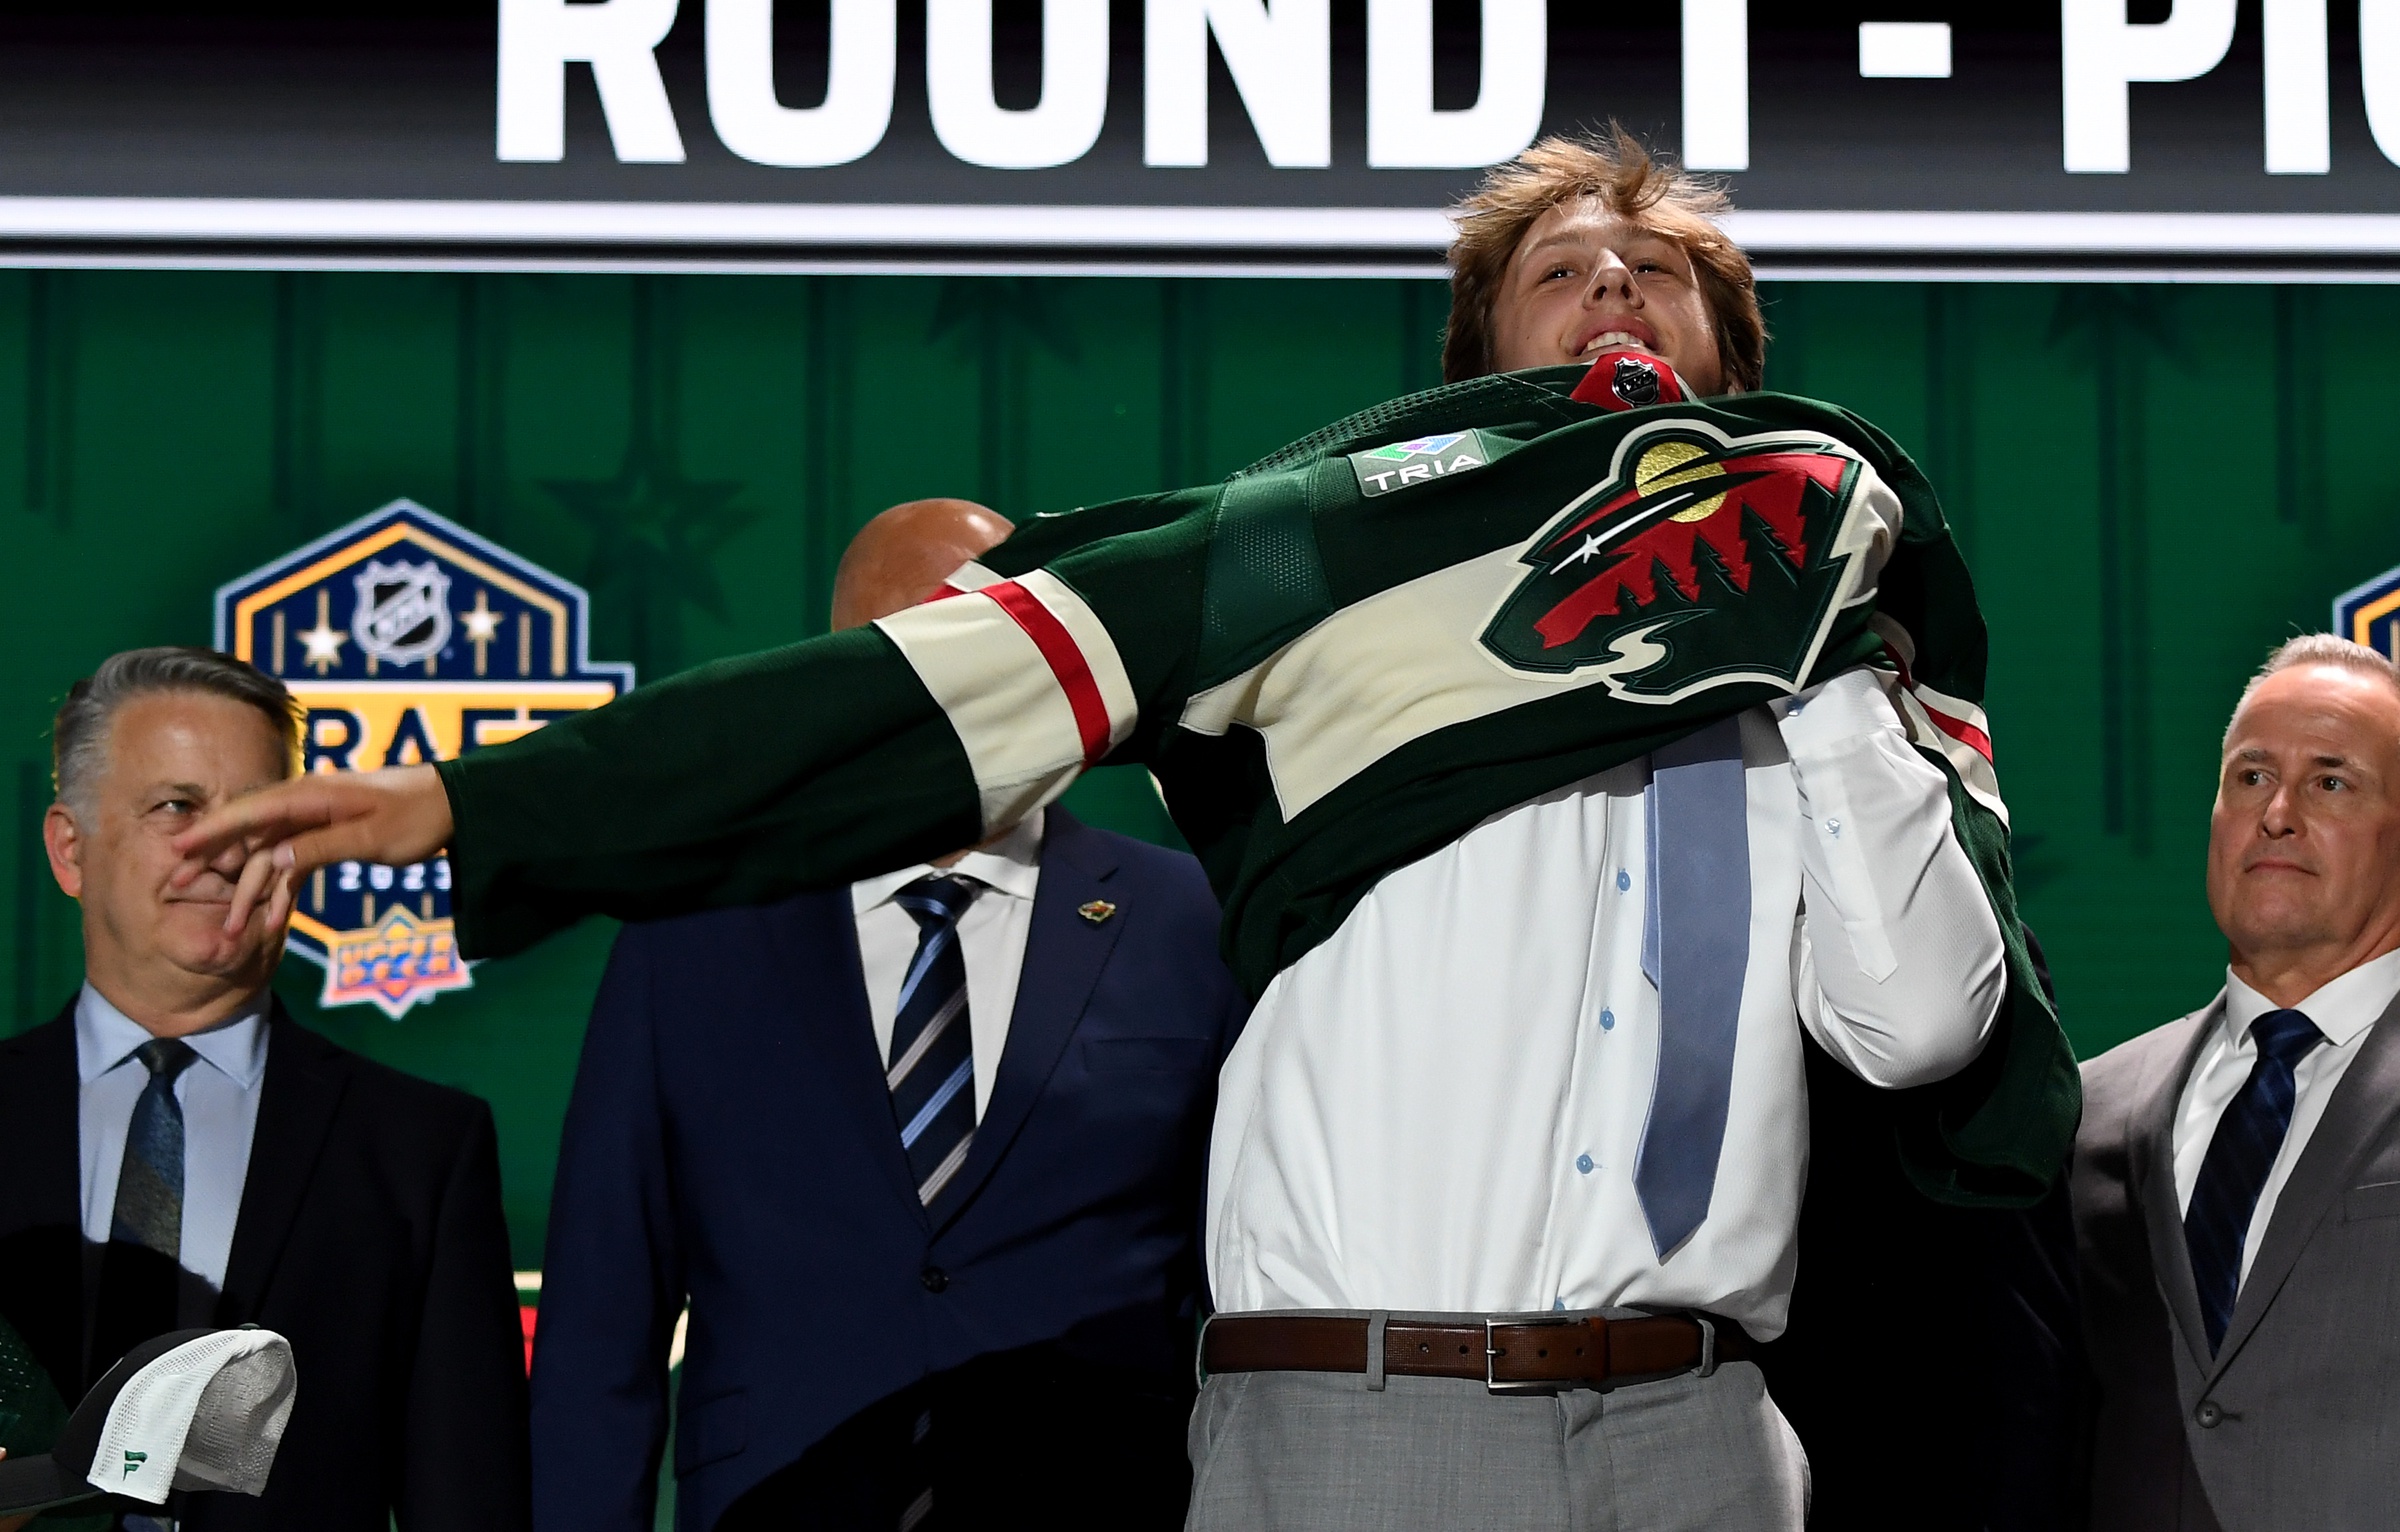 NHL Draft 2018 results: Pick-by-pick tracker for Round 1 